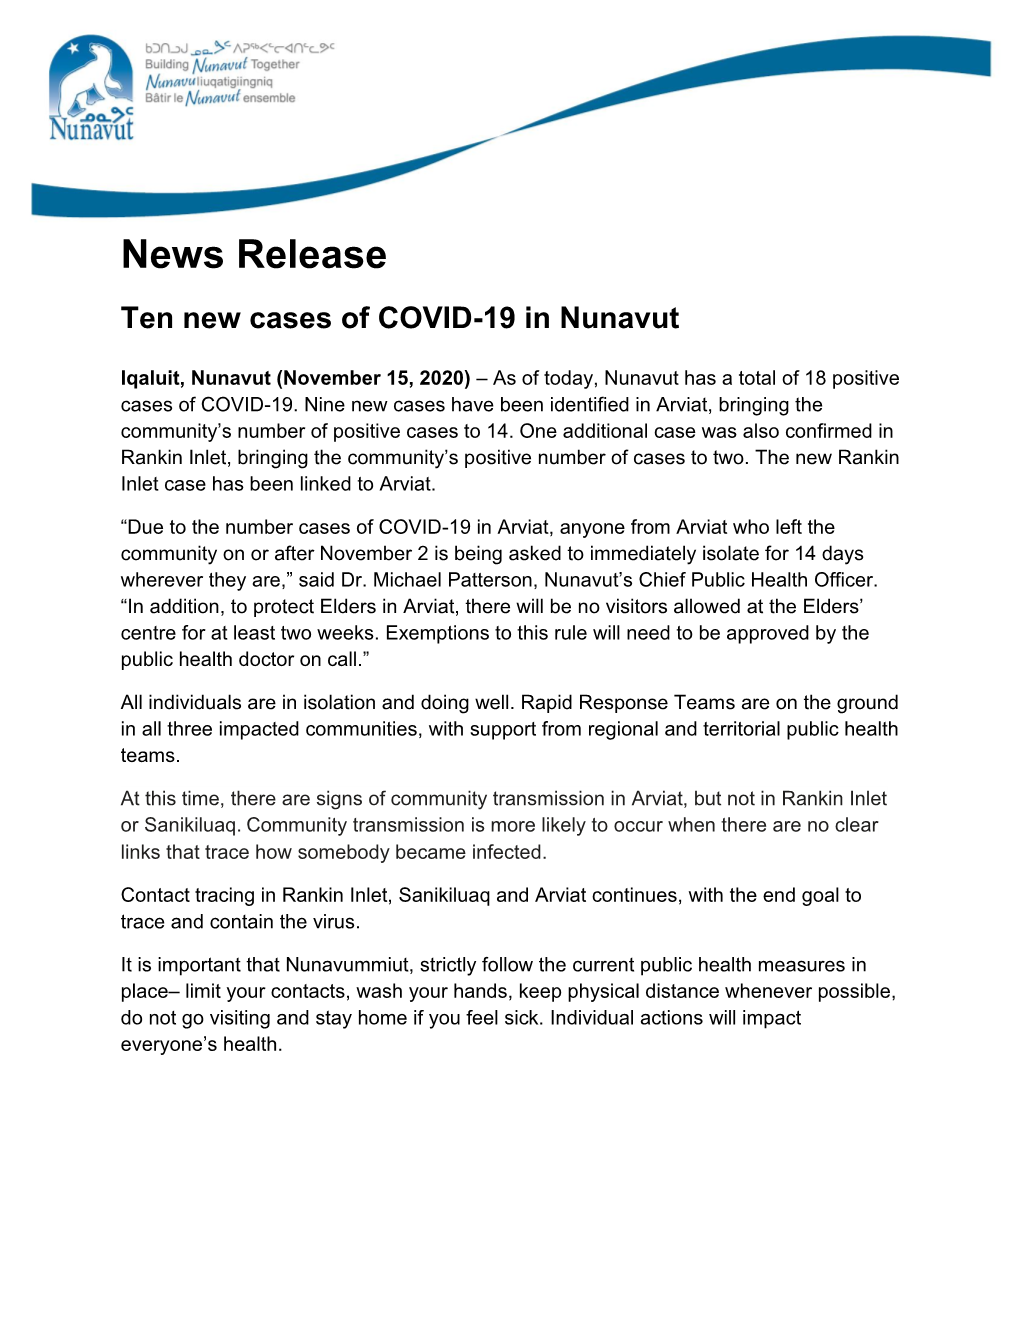 News Release Ten New Cases of COVID-19 in Nunavut